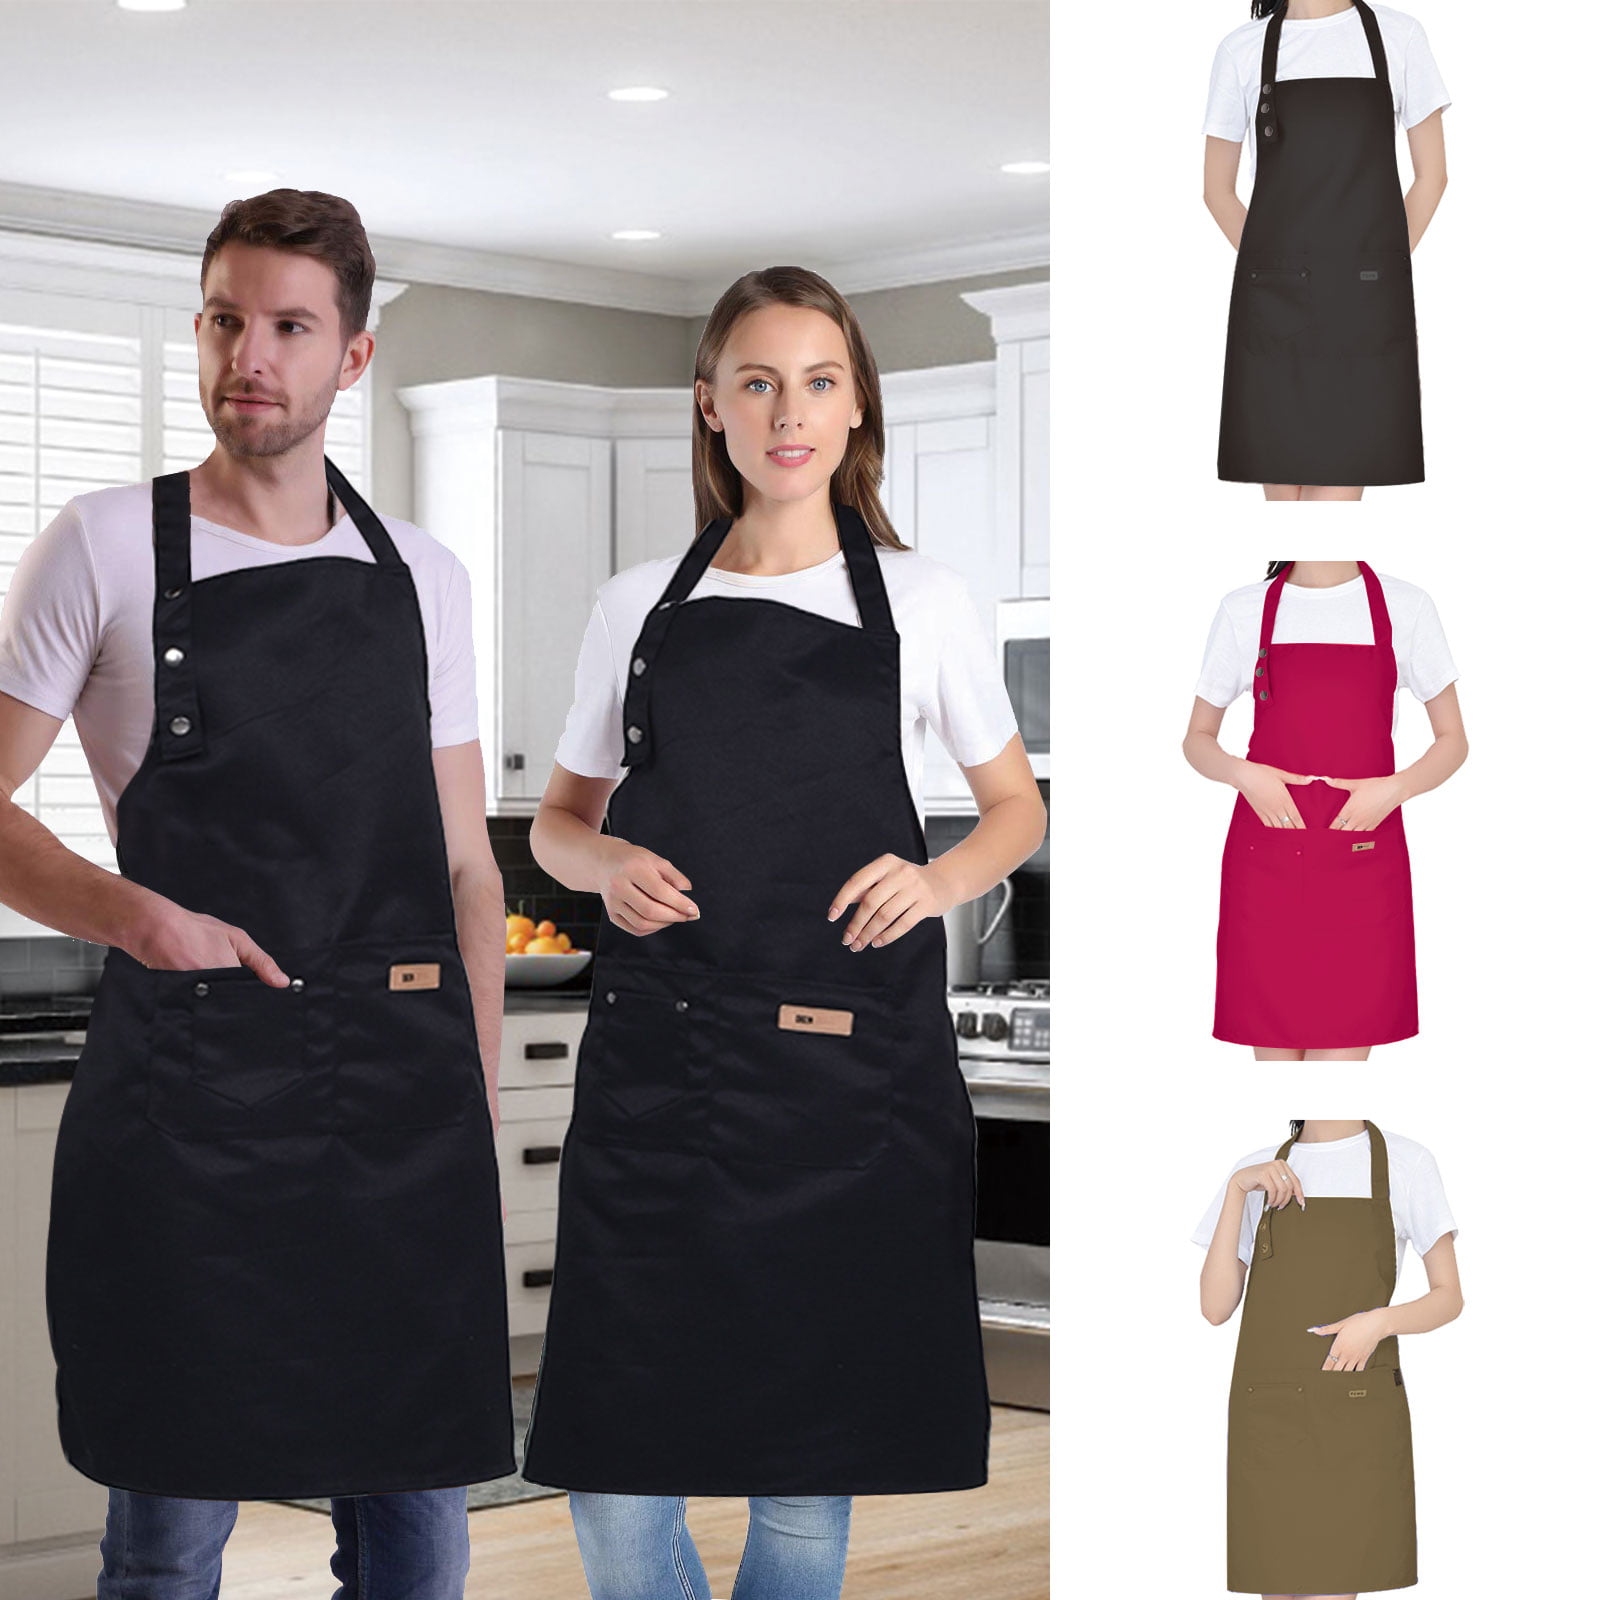 Adjustable Bib Aprons Waterproof with Pockets Kitchen Cooking Grill Garden Craft